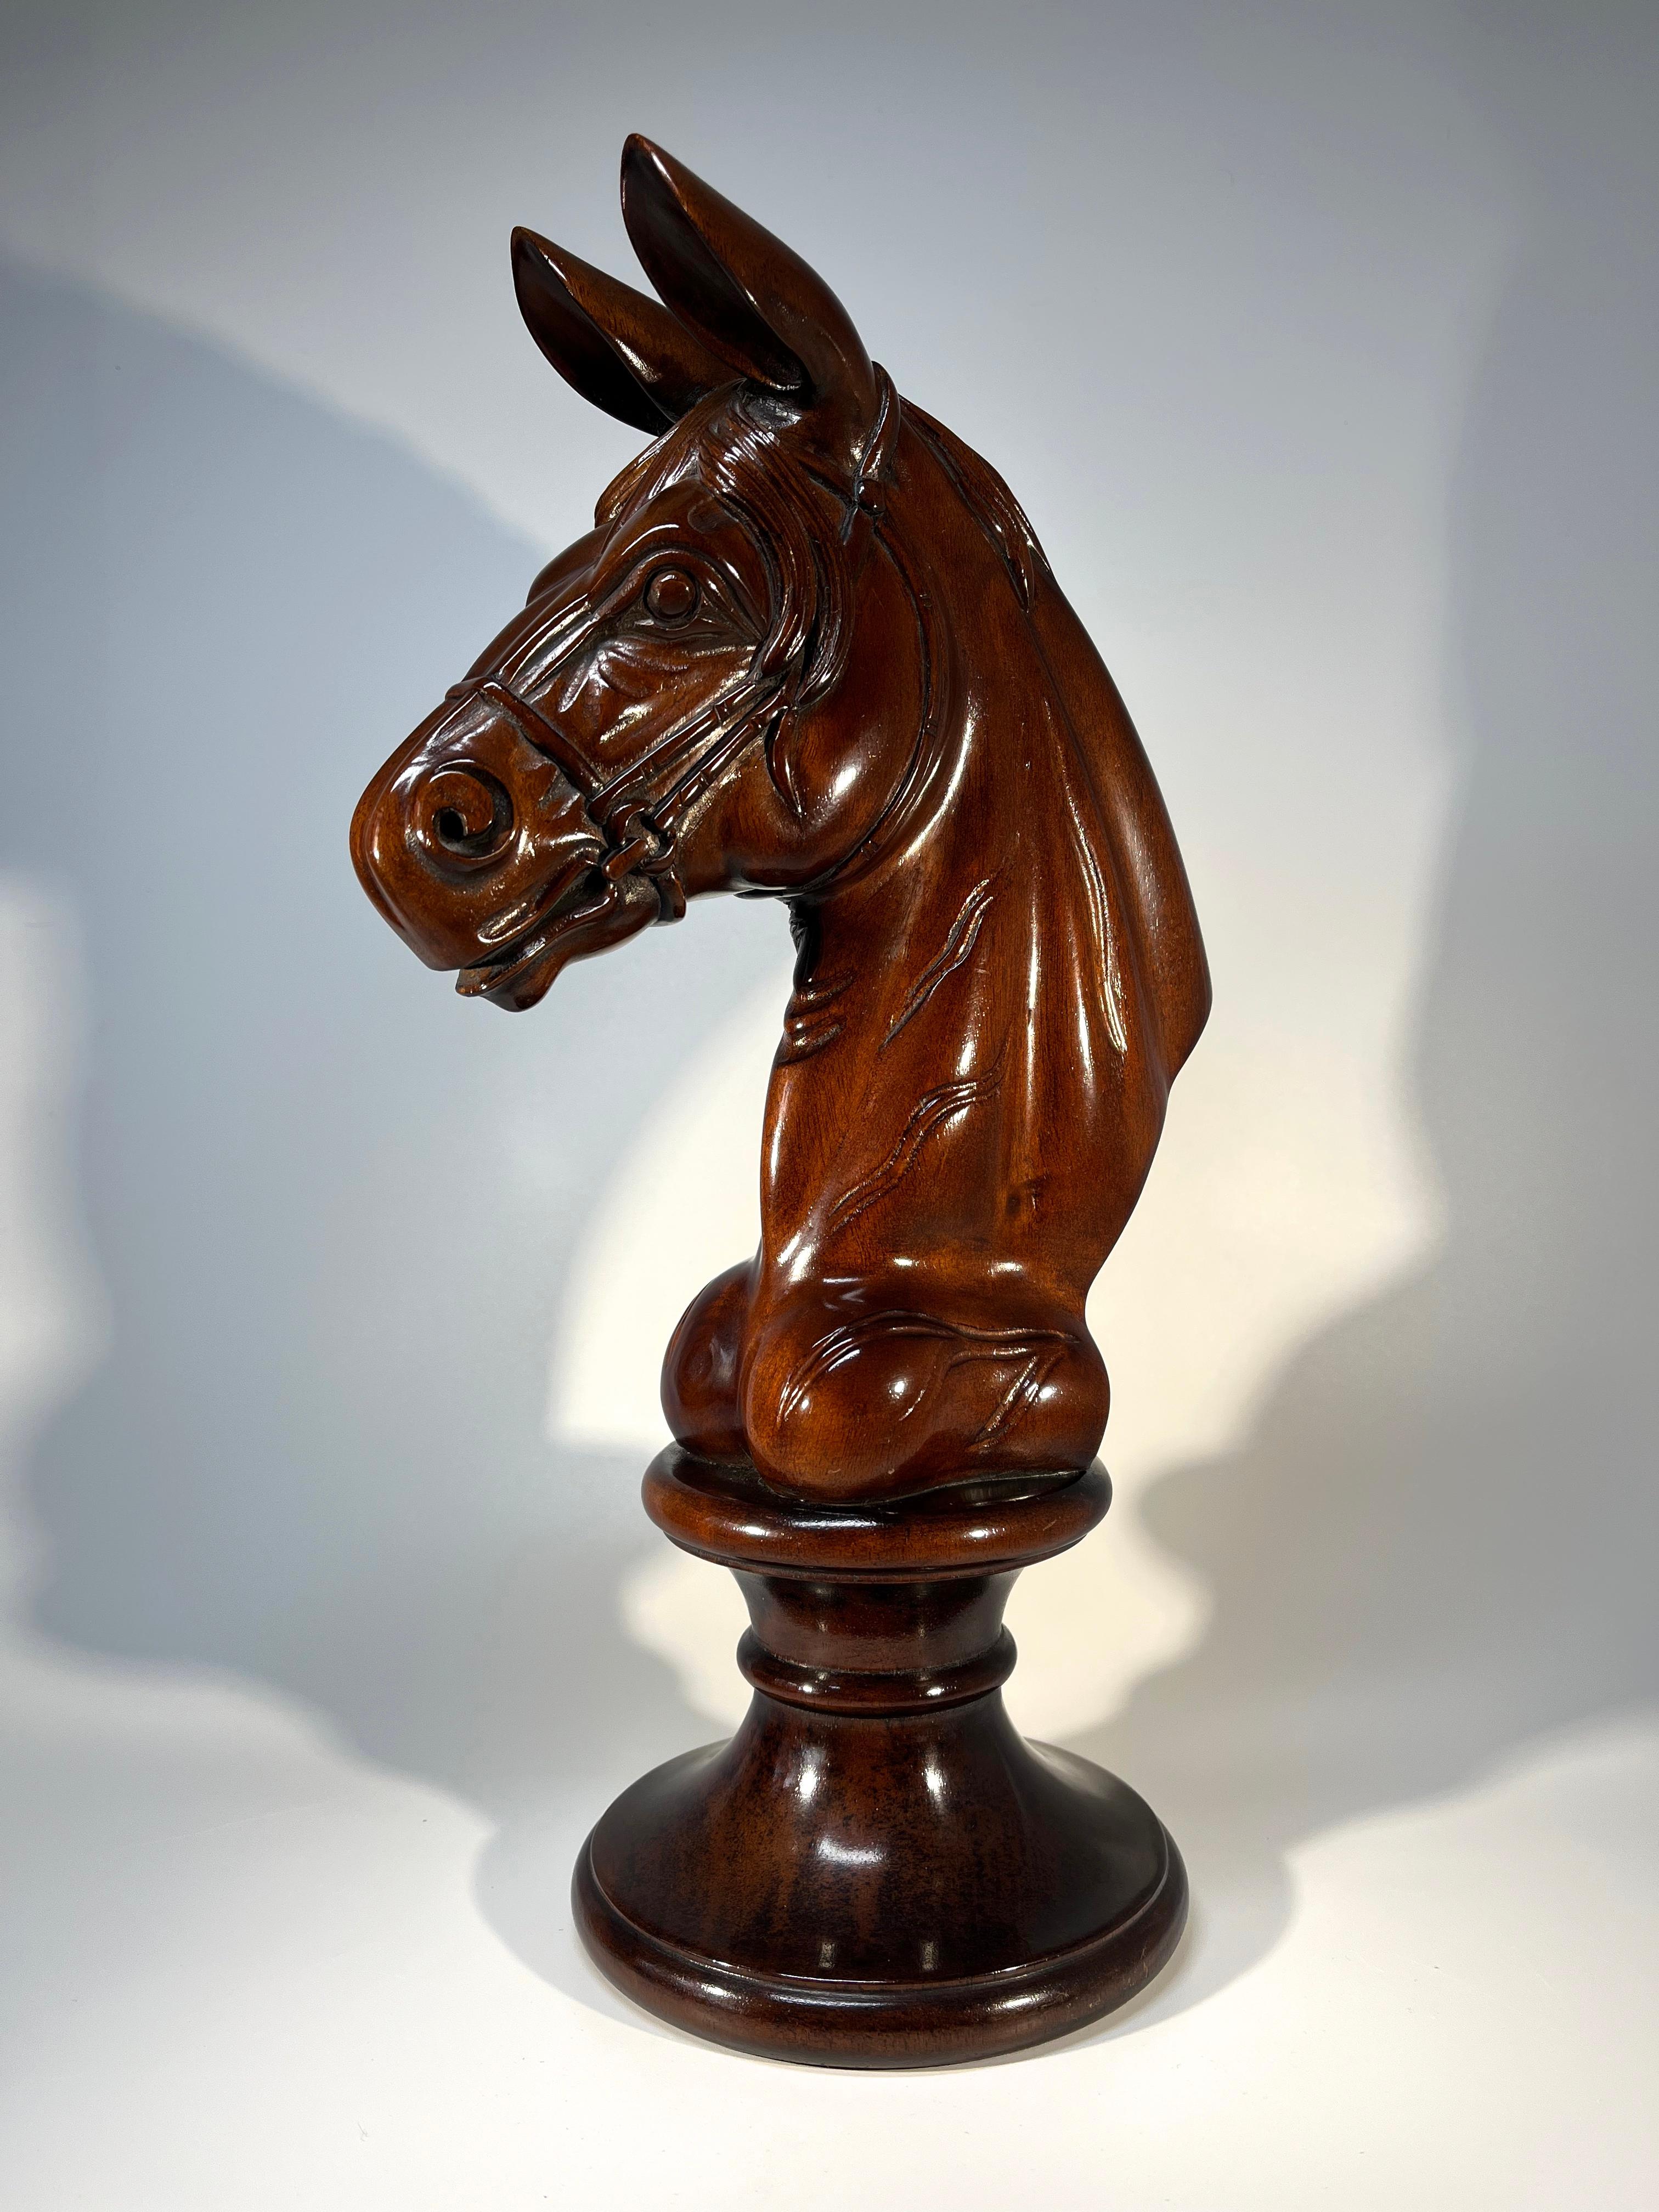 Kindred to a carousel galloper, a distinguished and elegant mahogany Italian horses head on pedestal
Collectible piece of object d'art for the equine devotee
Circa 1960's
Height 14 inch, Width 8 inch, Depth 5.5 inch
In very good condition.  
Wear